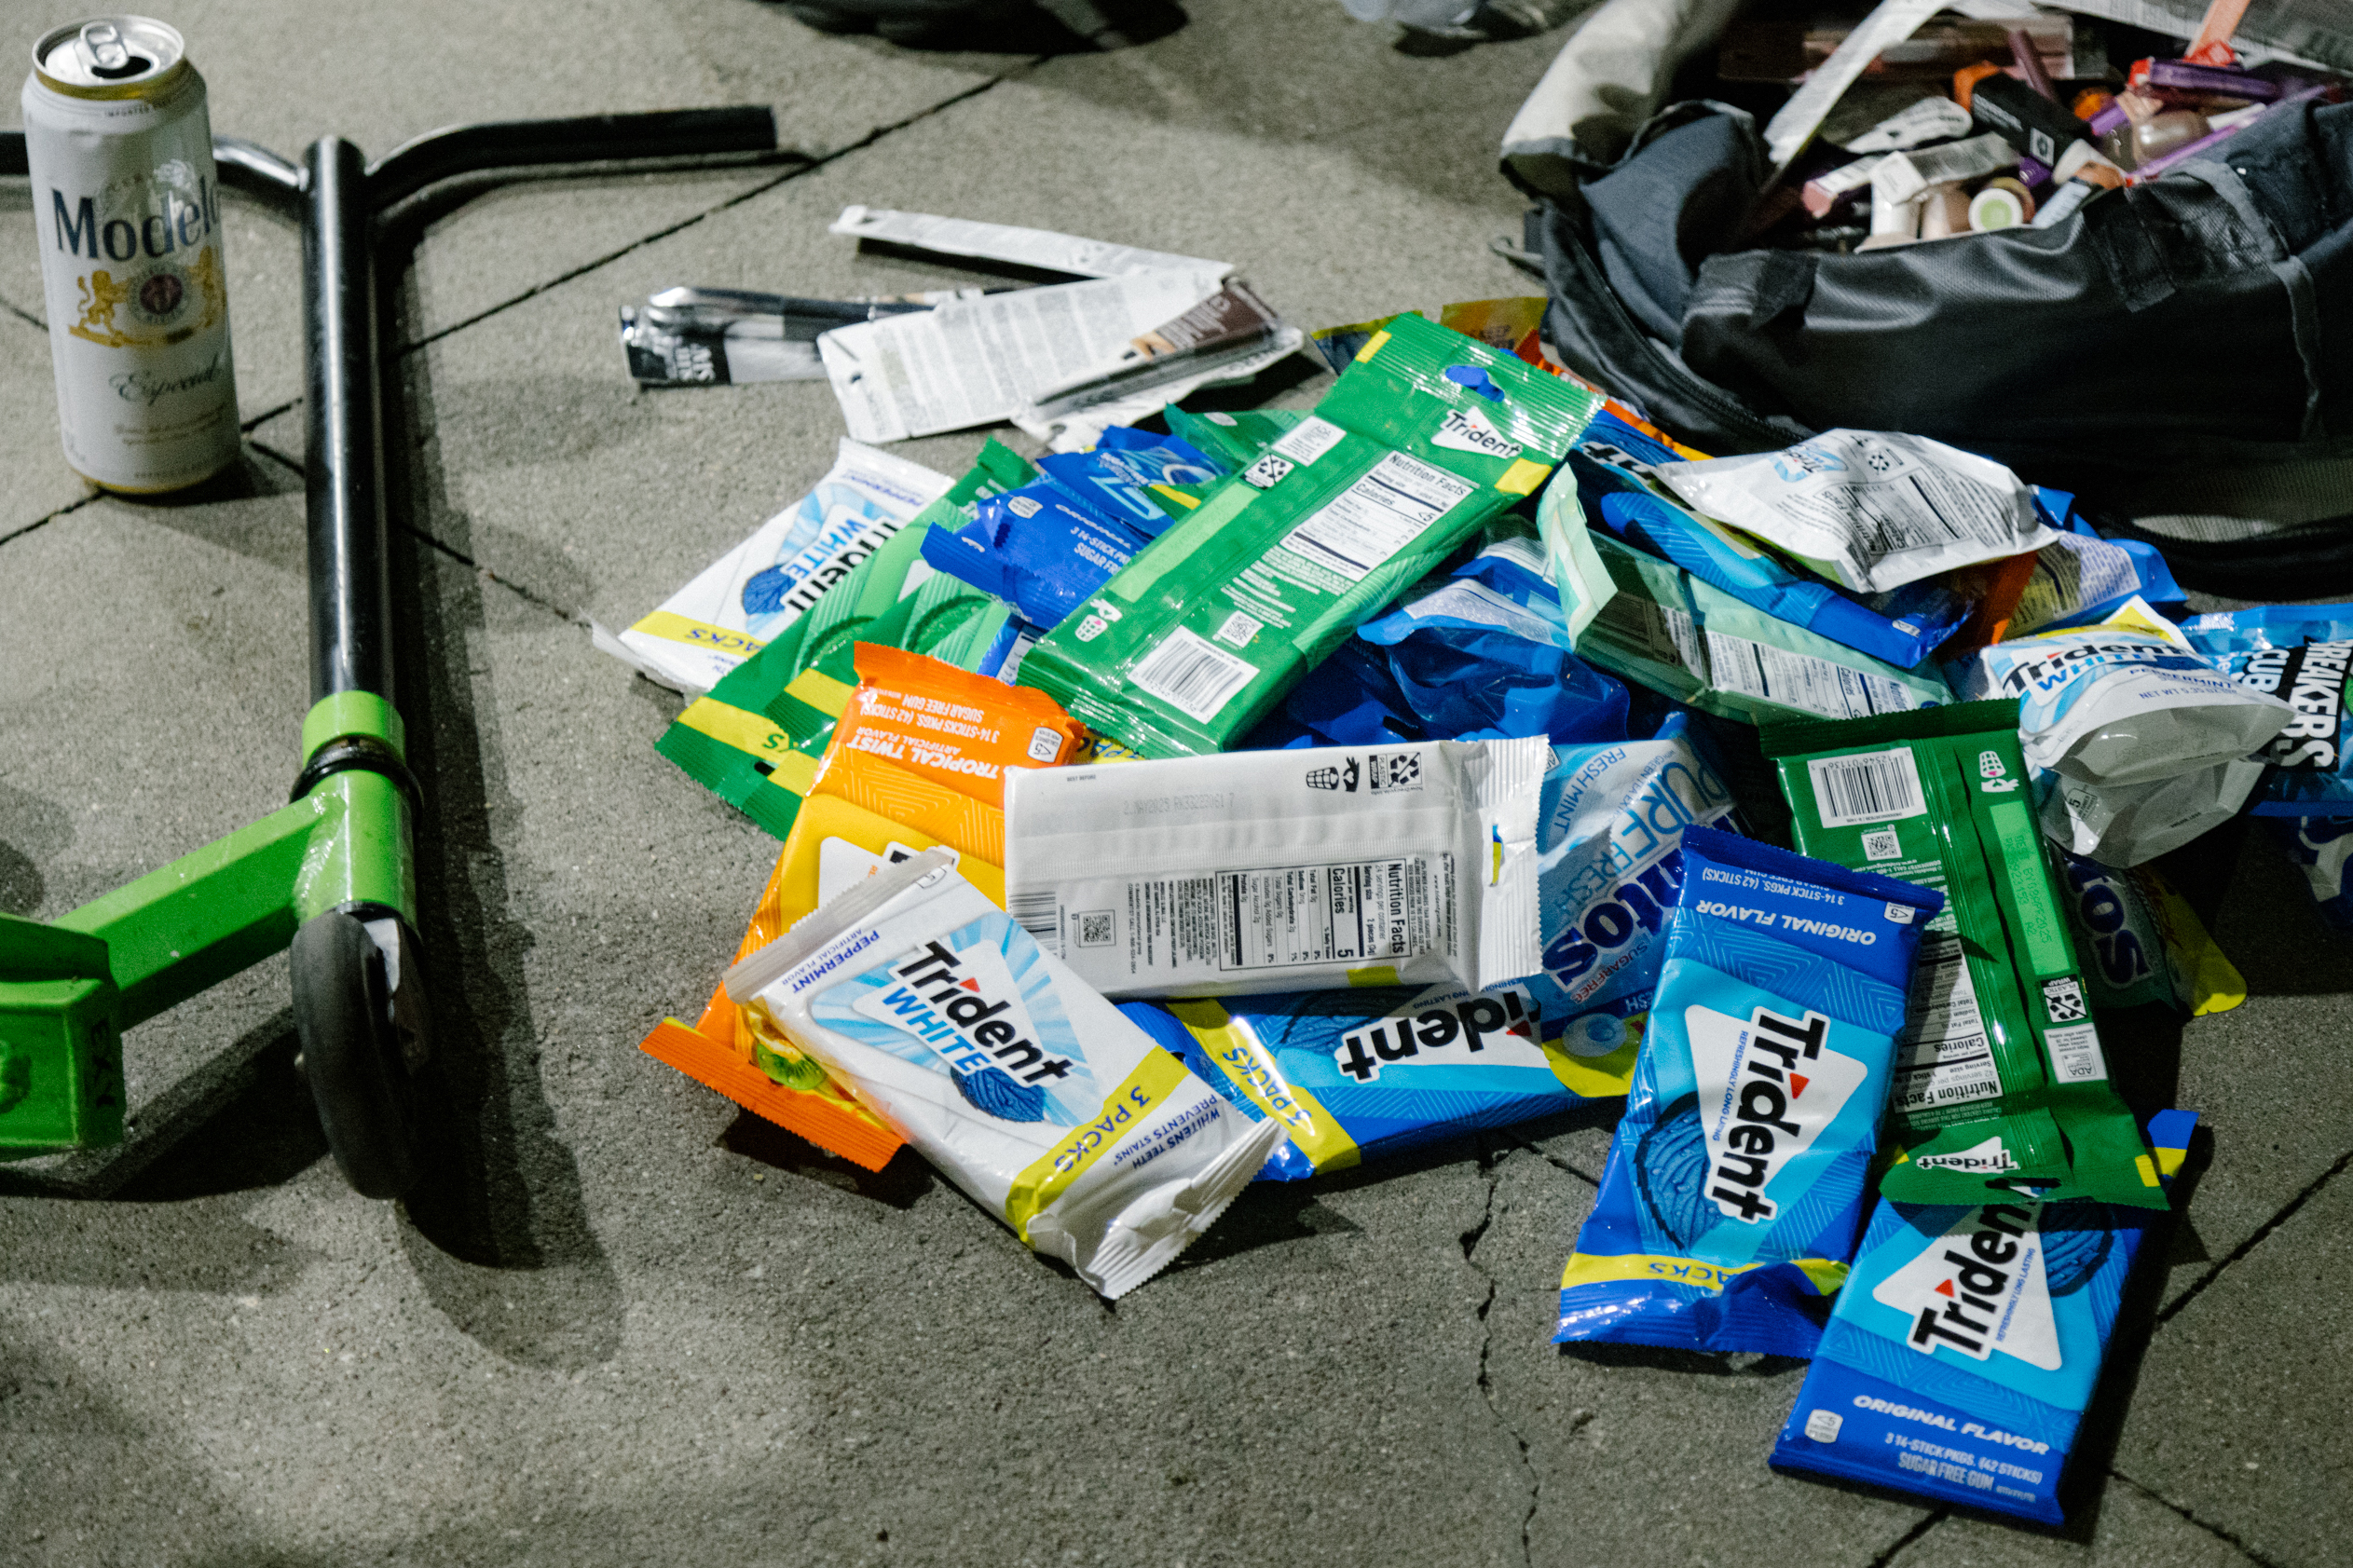 A pile of discarded chewing gum packets and a beer can, with a scooter laying nearby on a concrete surface.